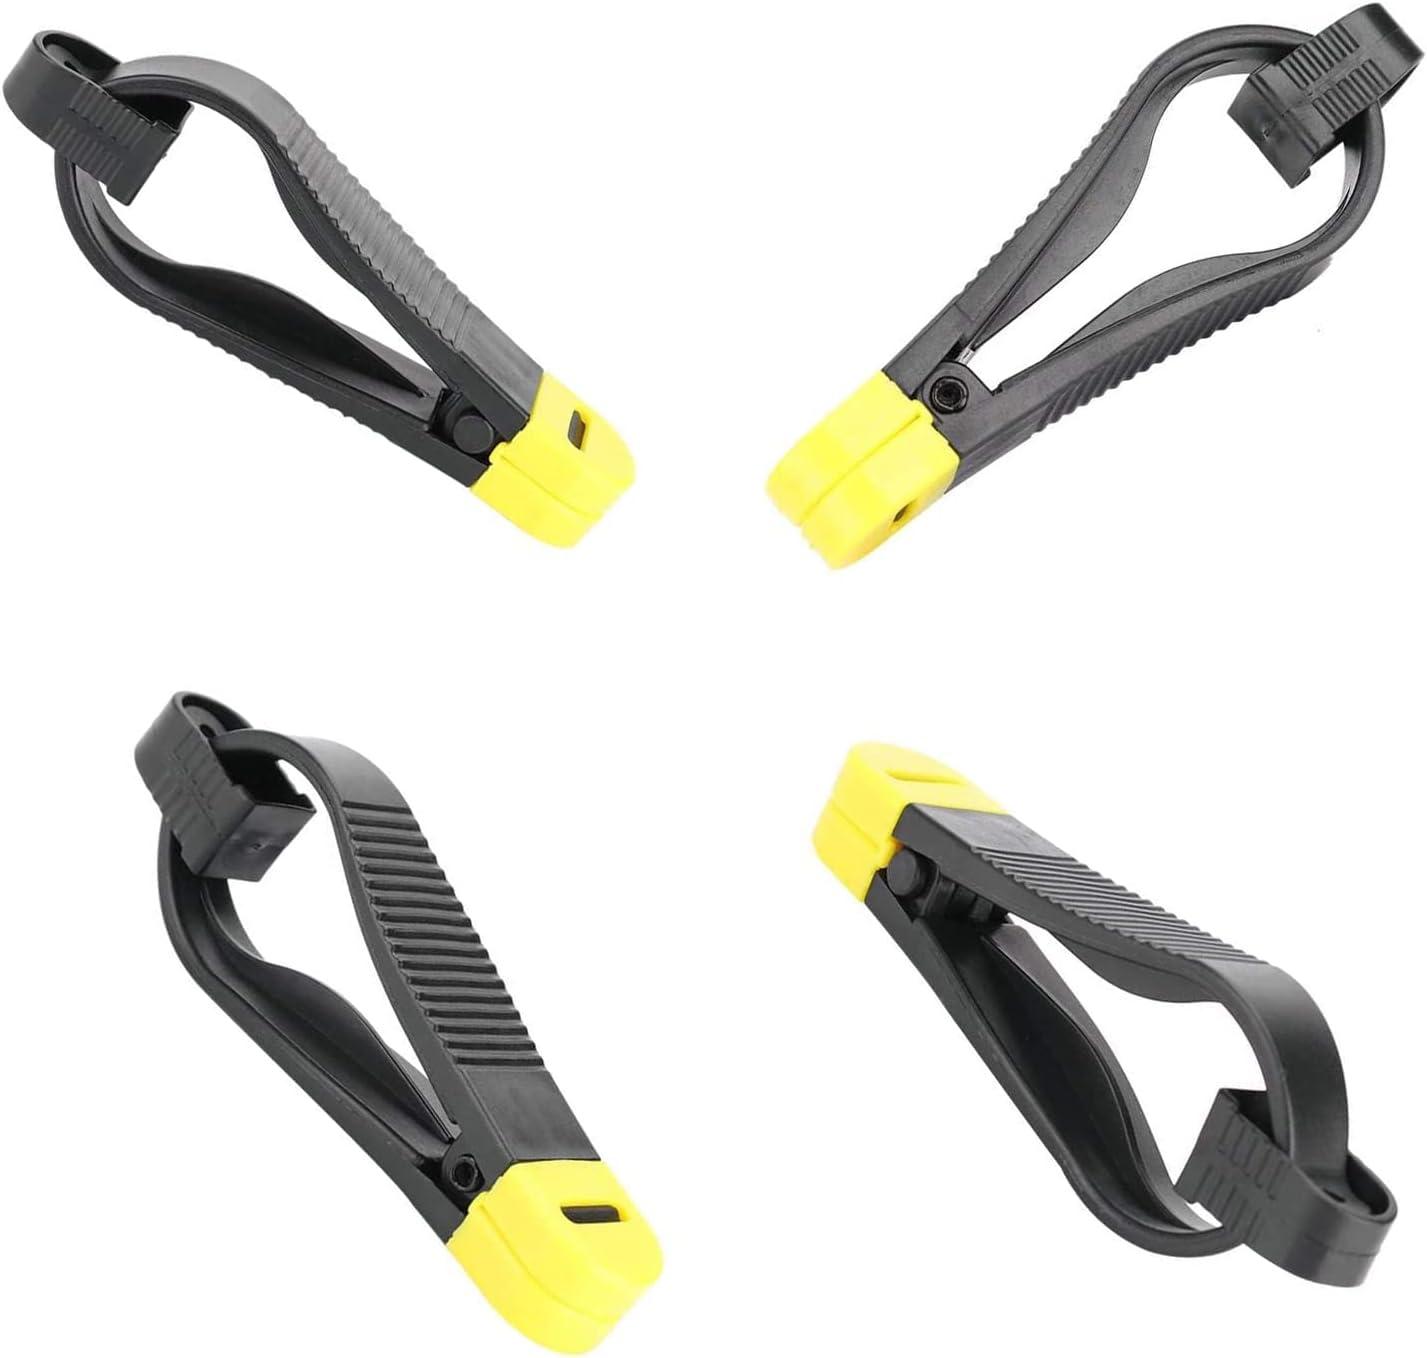 FUNORNAM 4Pcs Power Grip Line Release Clips with 18-Inch Leader